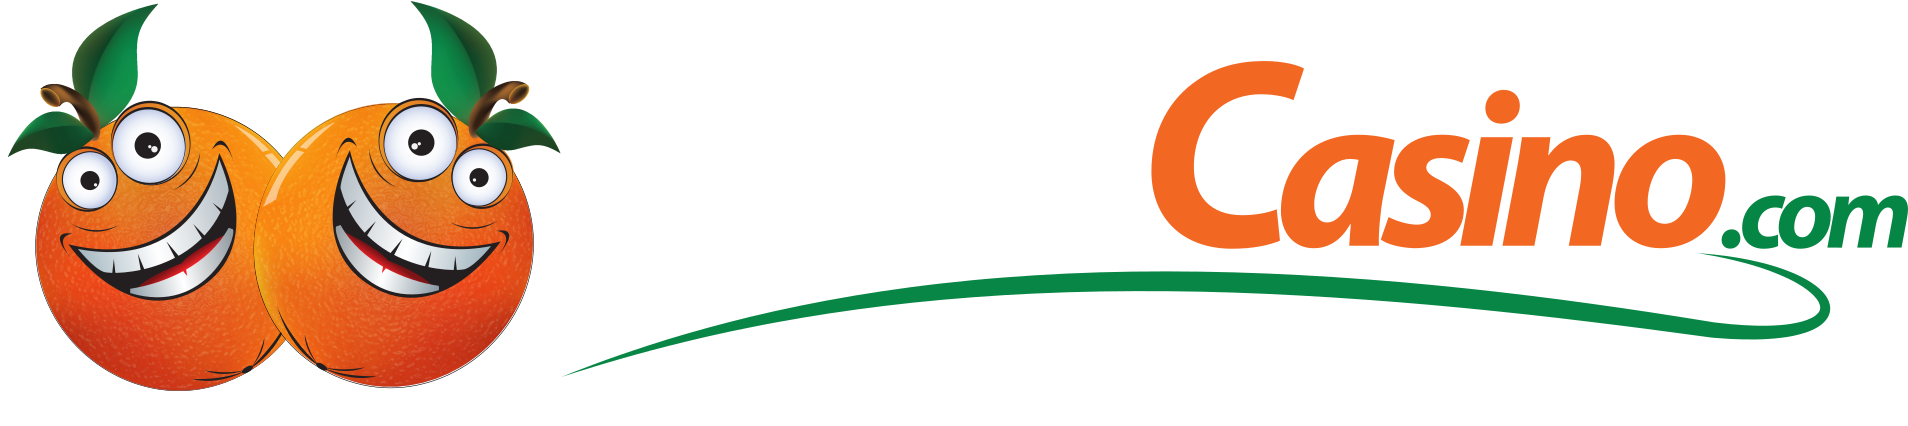 Casino as One of the Popular Internet Casino Sites Listed with ez baccarat